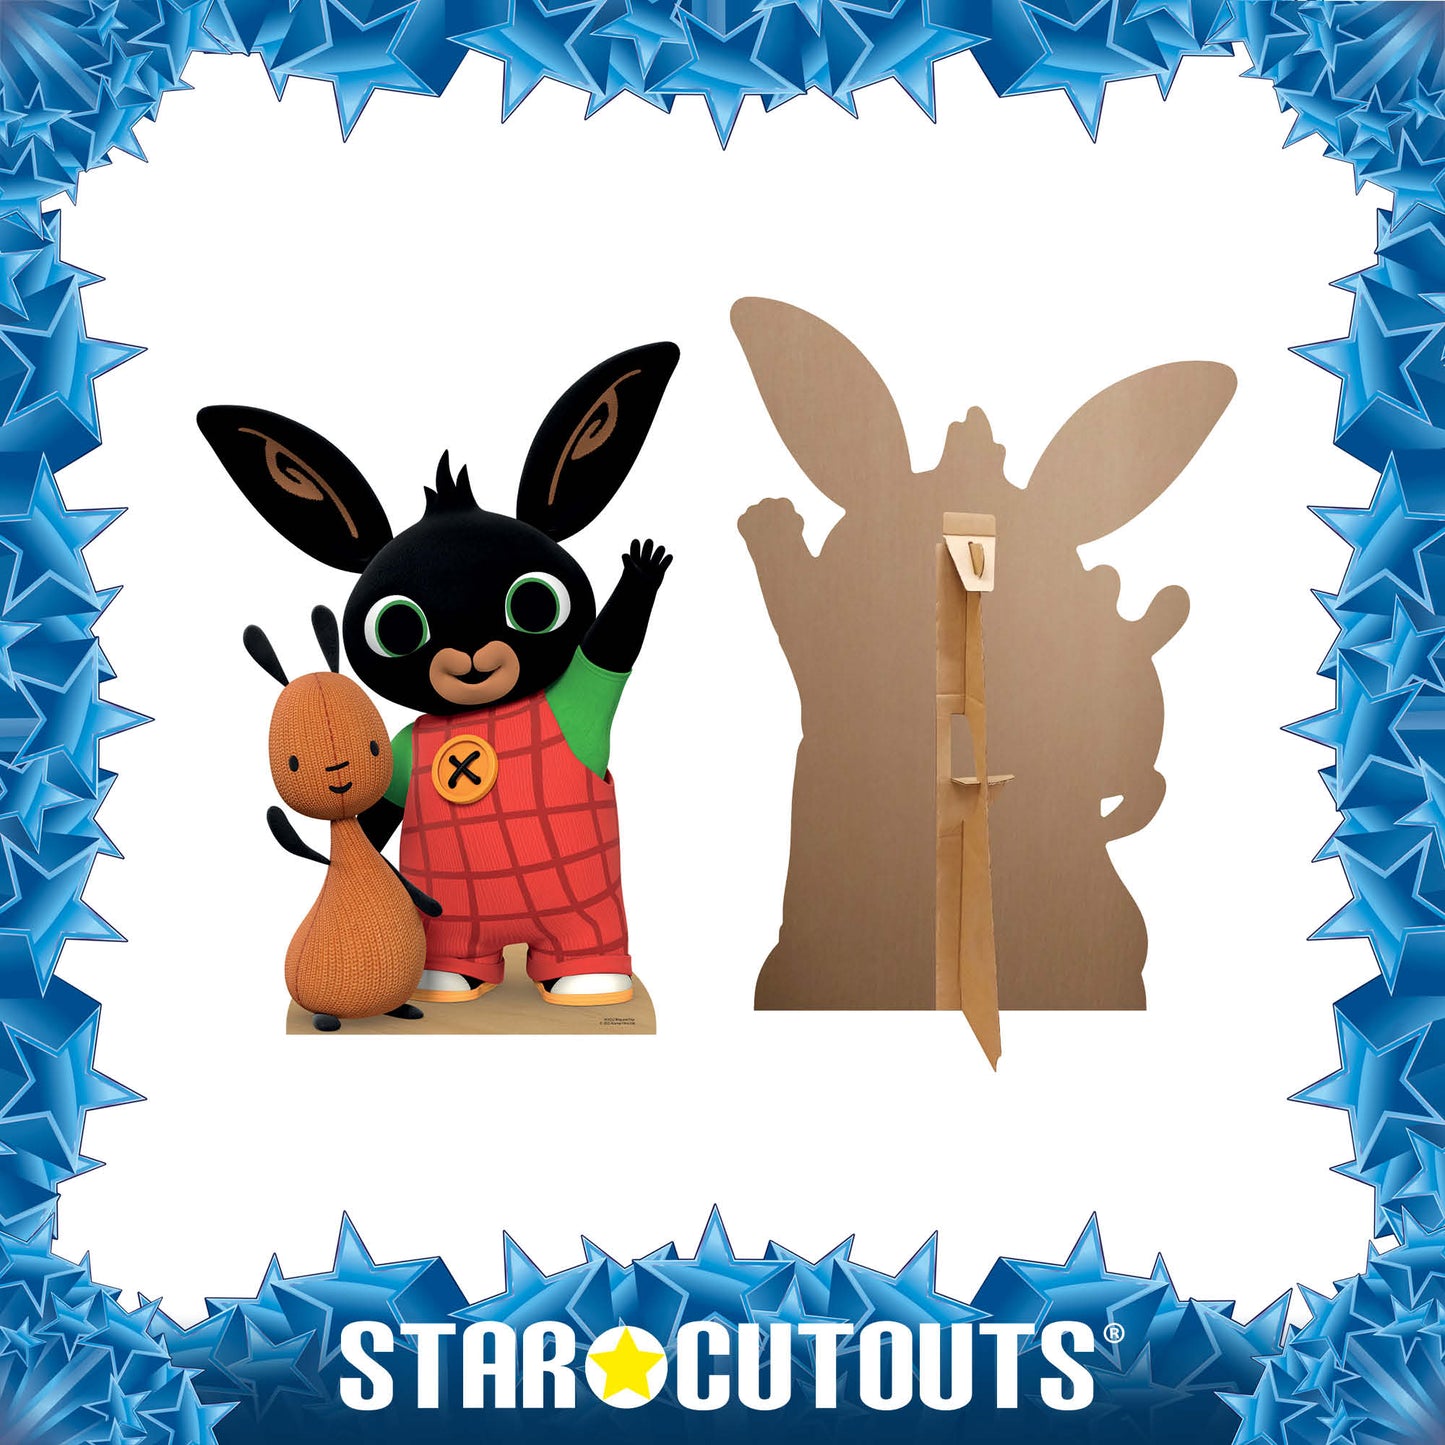 SC4112 Bing and Flop Cardboard Cut Out Height 95cm - Star Cutouts